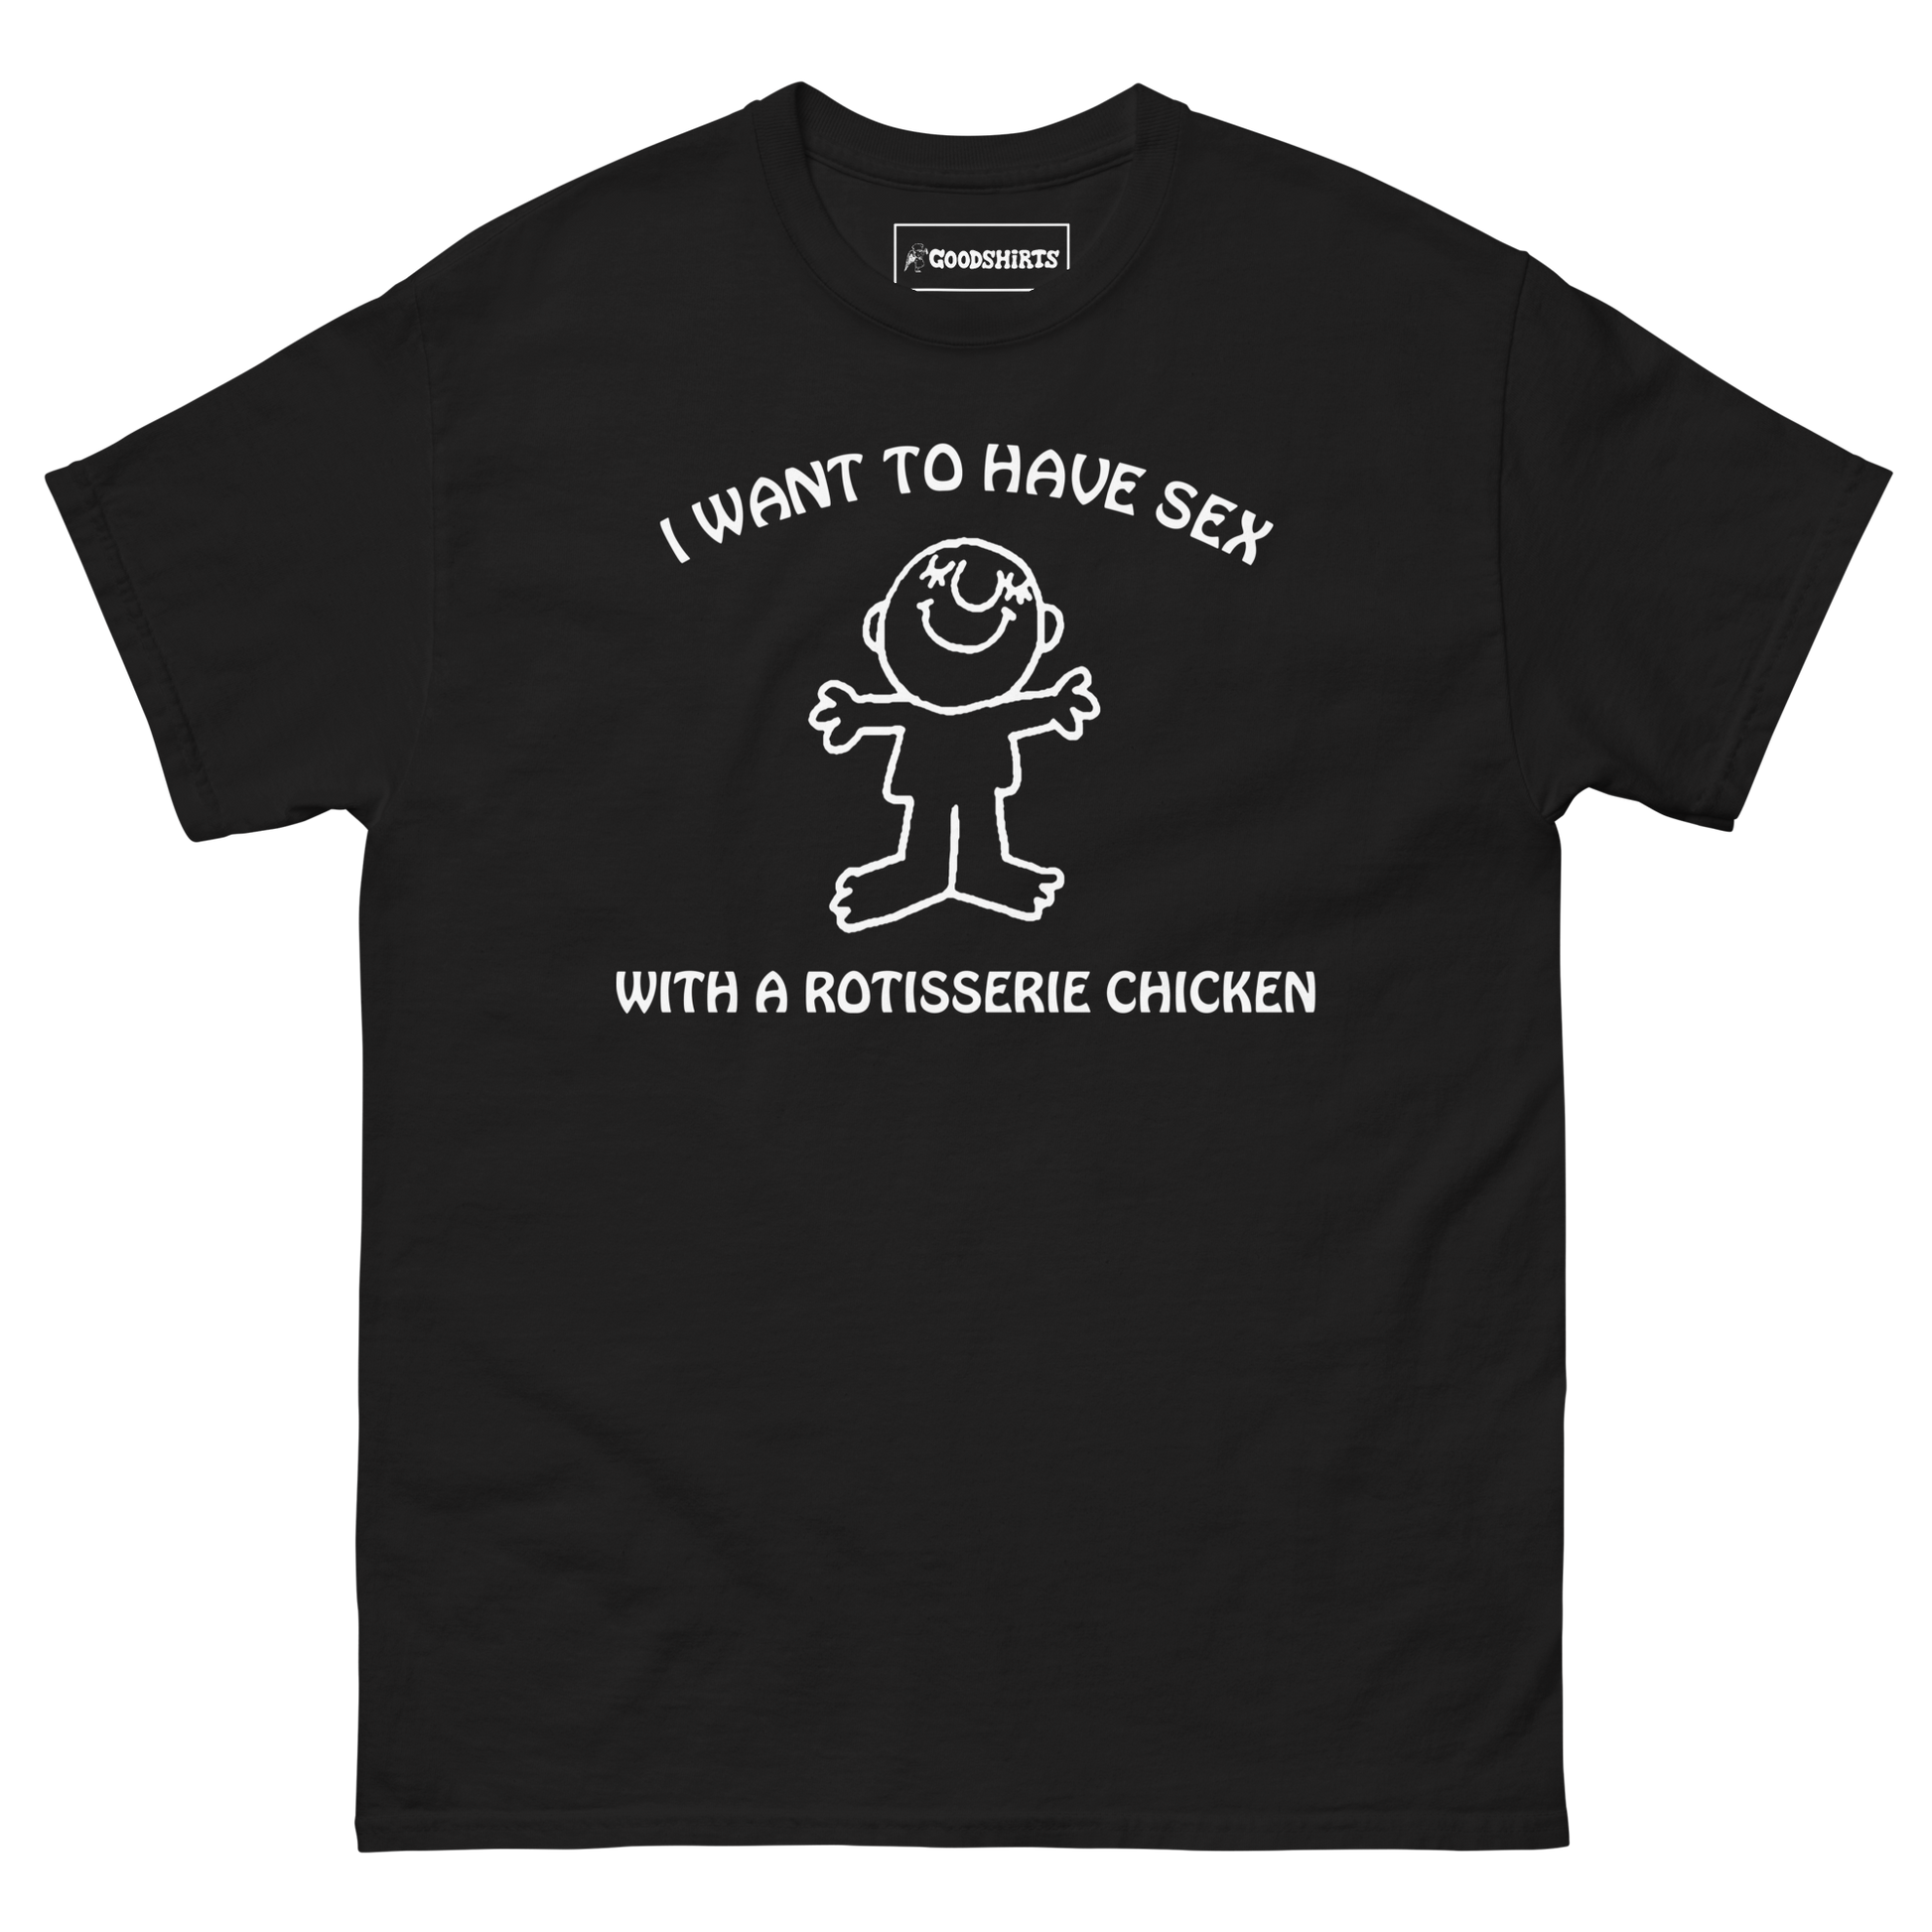 I Want To Have Sex With A Rotisserie Chicken. – Good Shirts